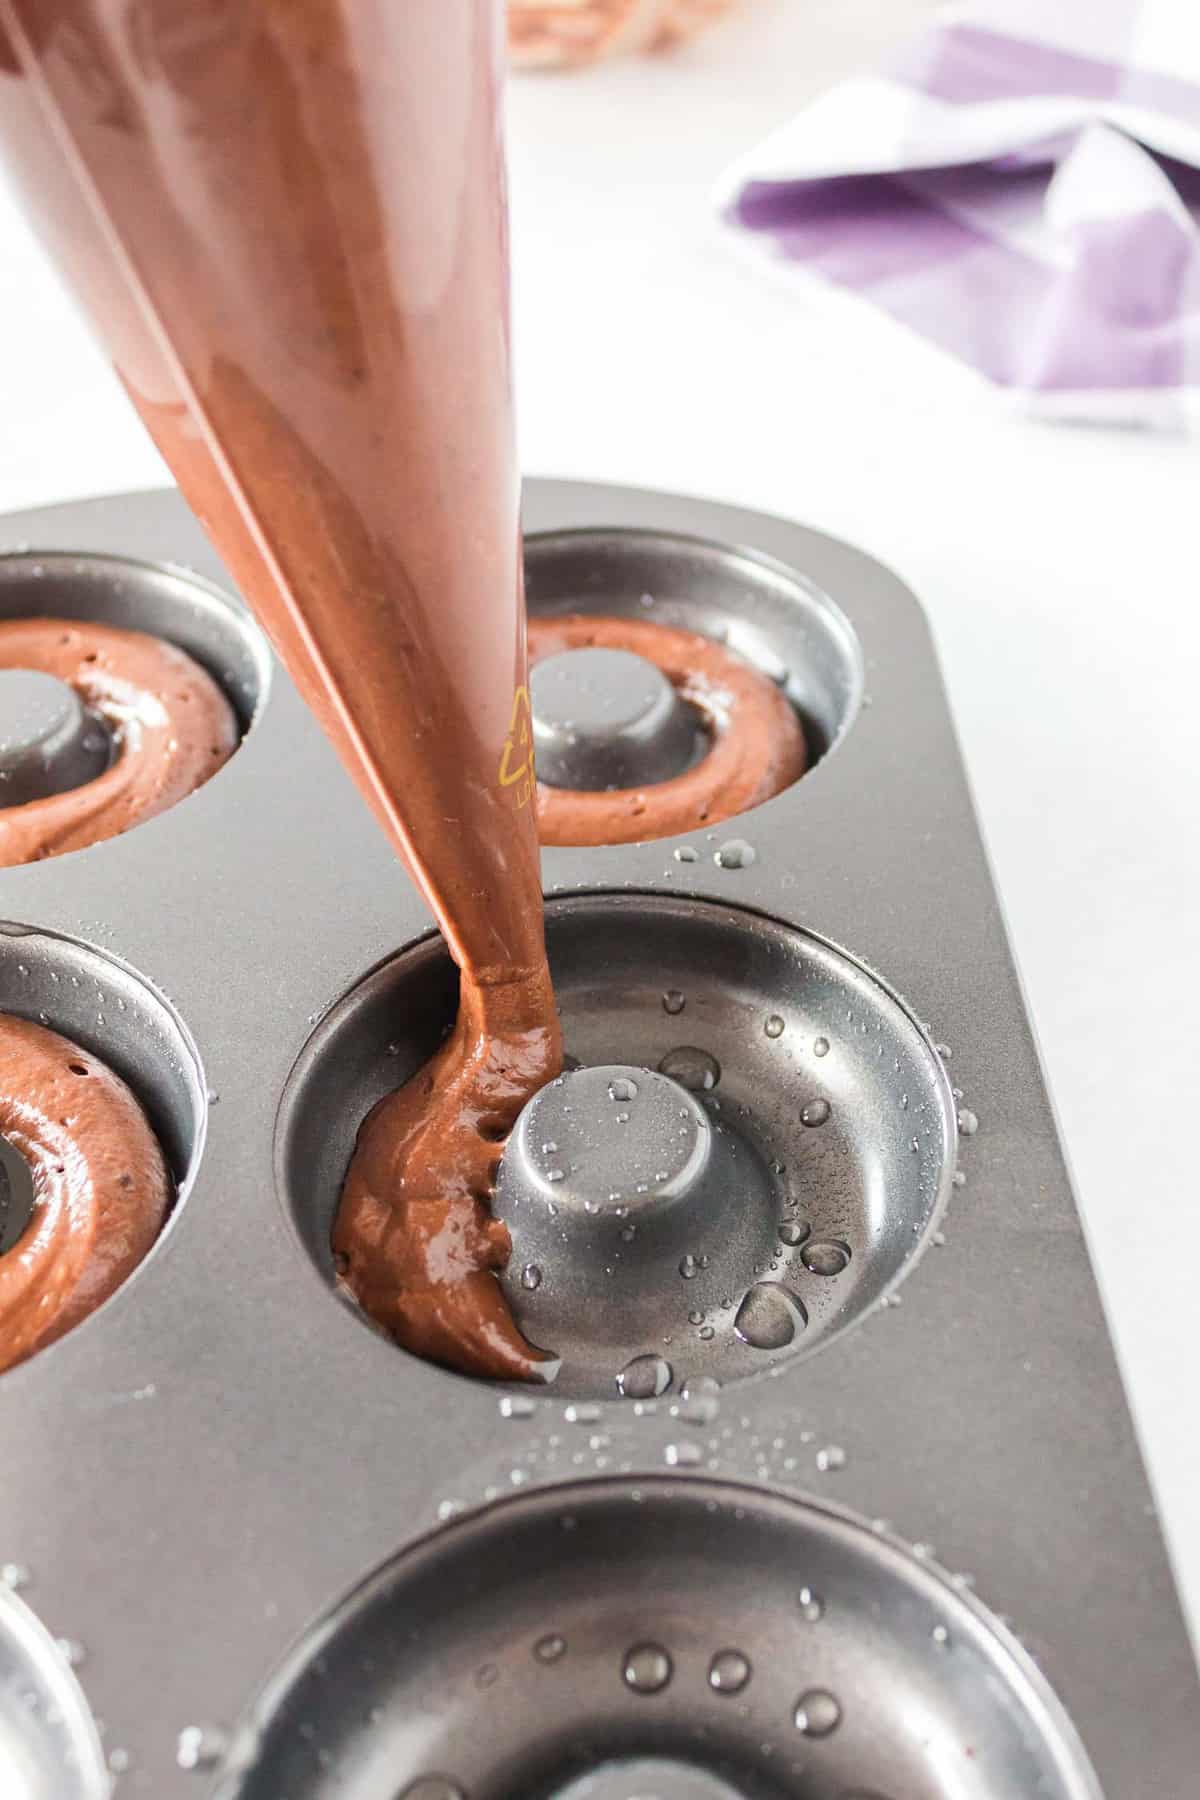 Chocolate batter being piped into a donut pan.